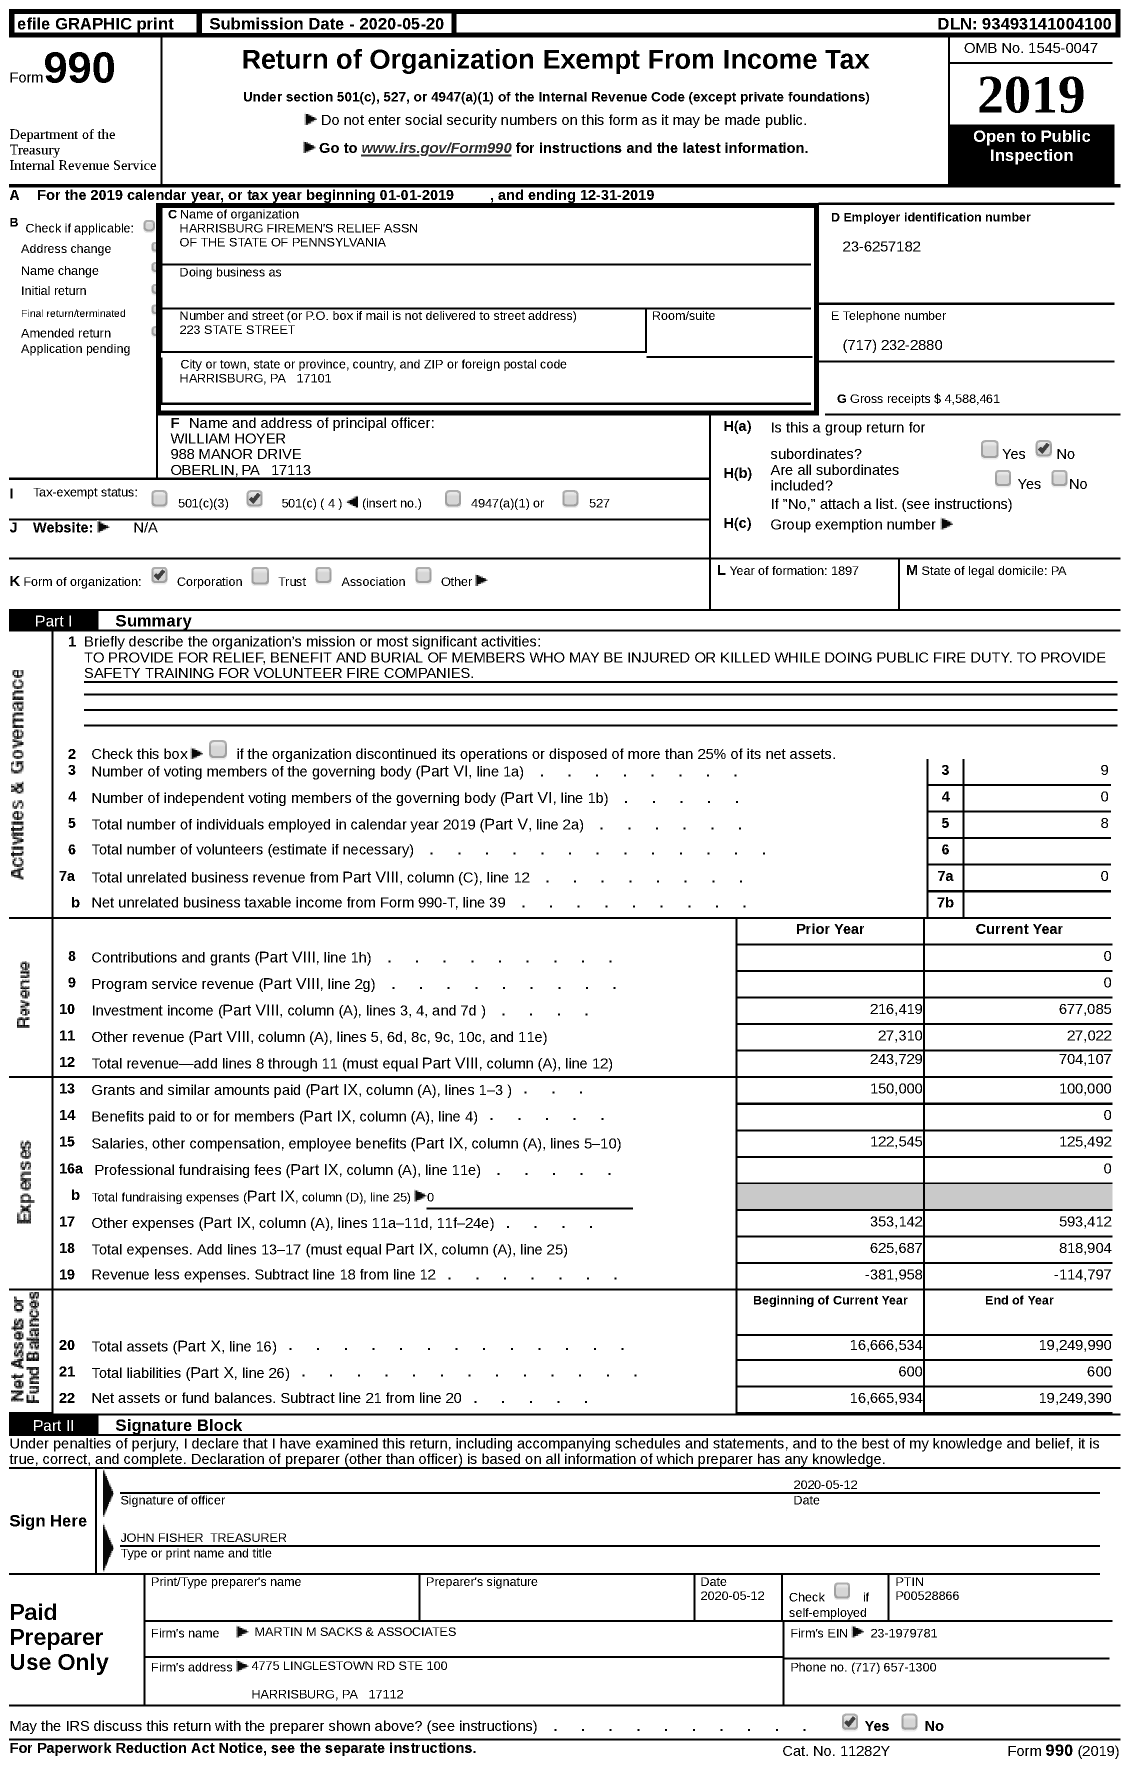 Image of first page of 2019 Form 990 for Harrisburg Firemen's Relief Association of the State of Pennsylvania